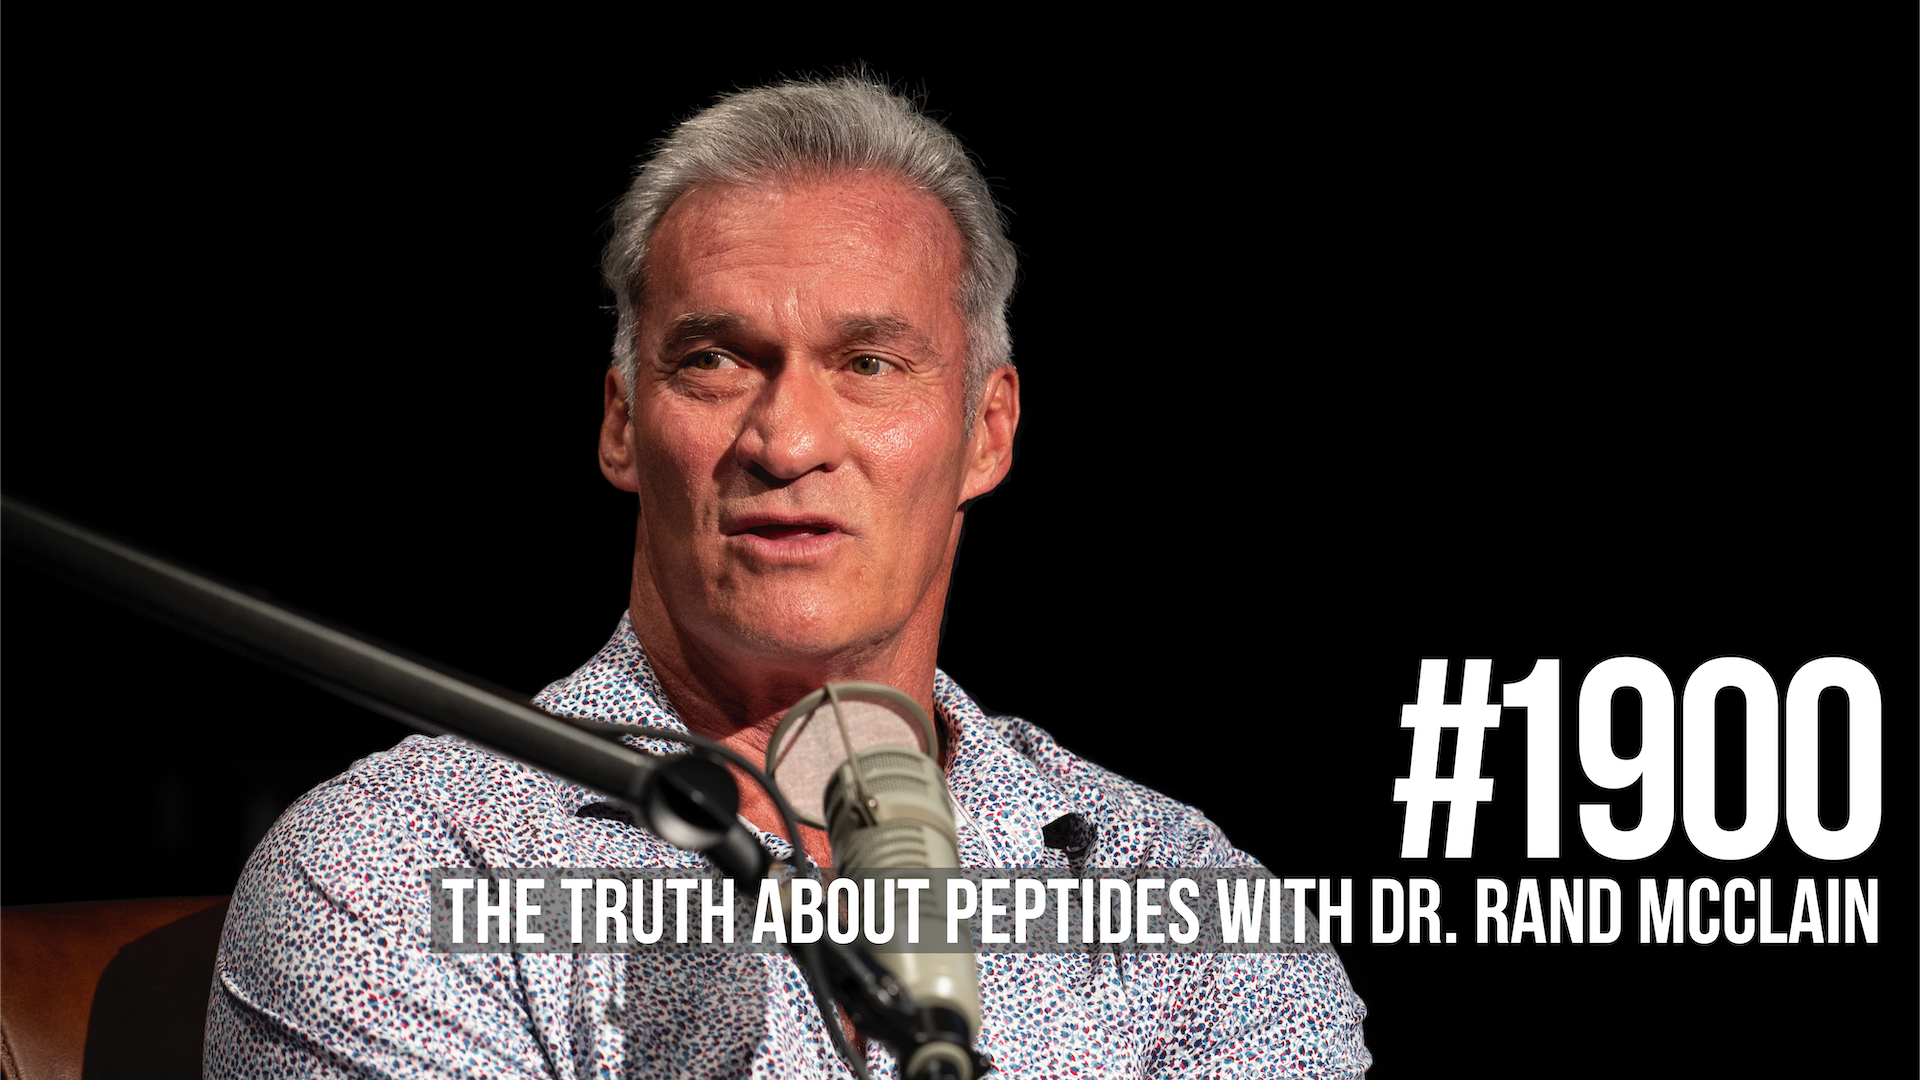 1900: The Truth About Peptides With Dr. Rand McClain